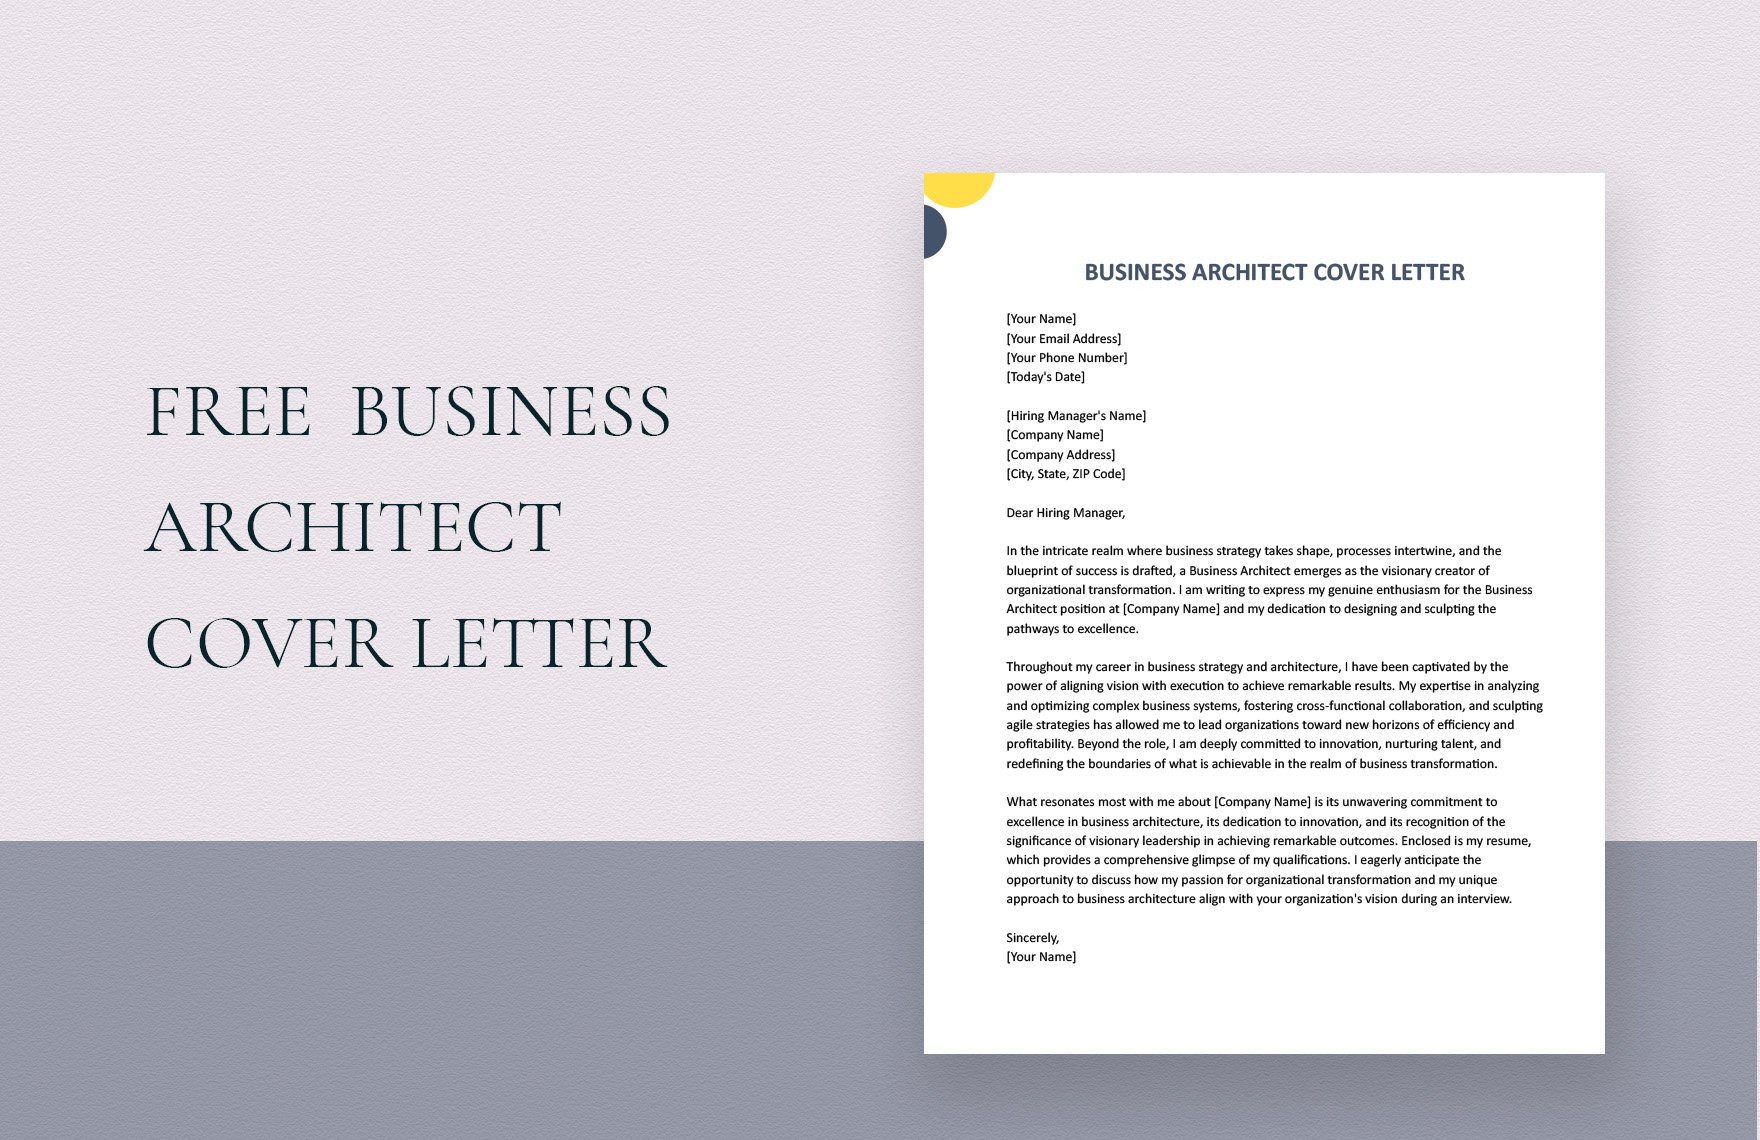 Business Architect Cover Letter in Word, Google Docs